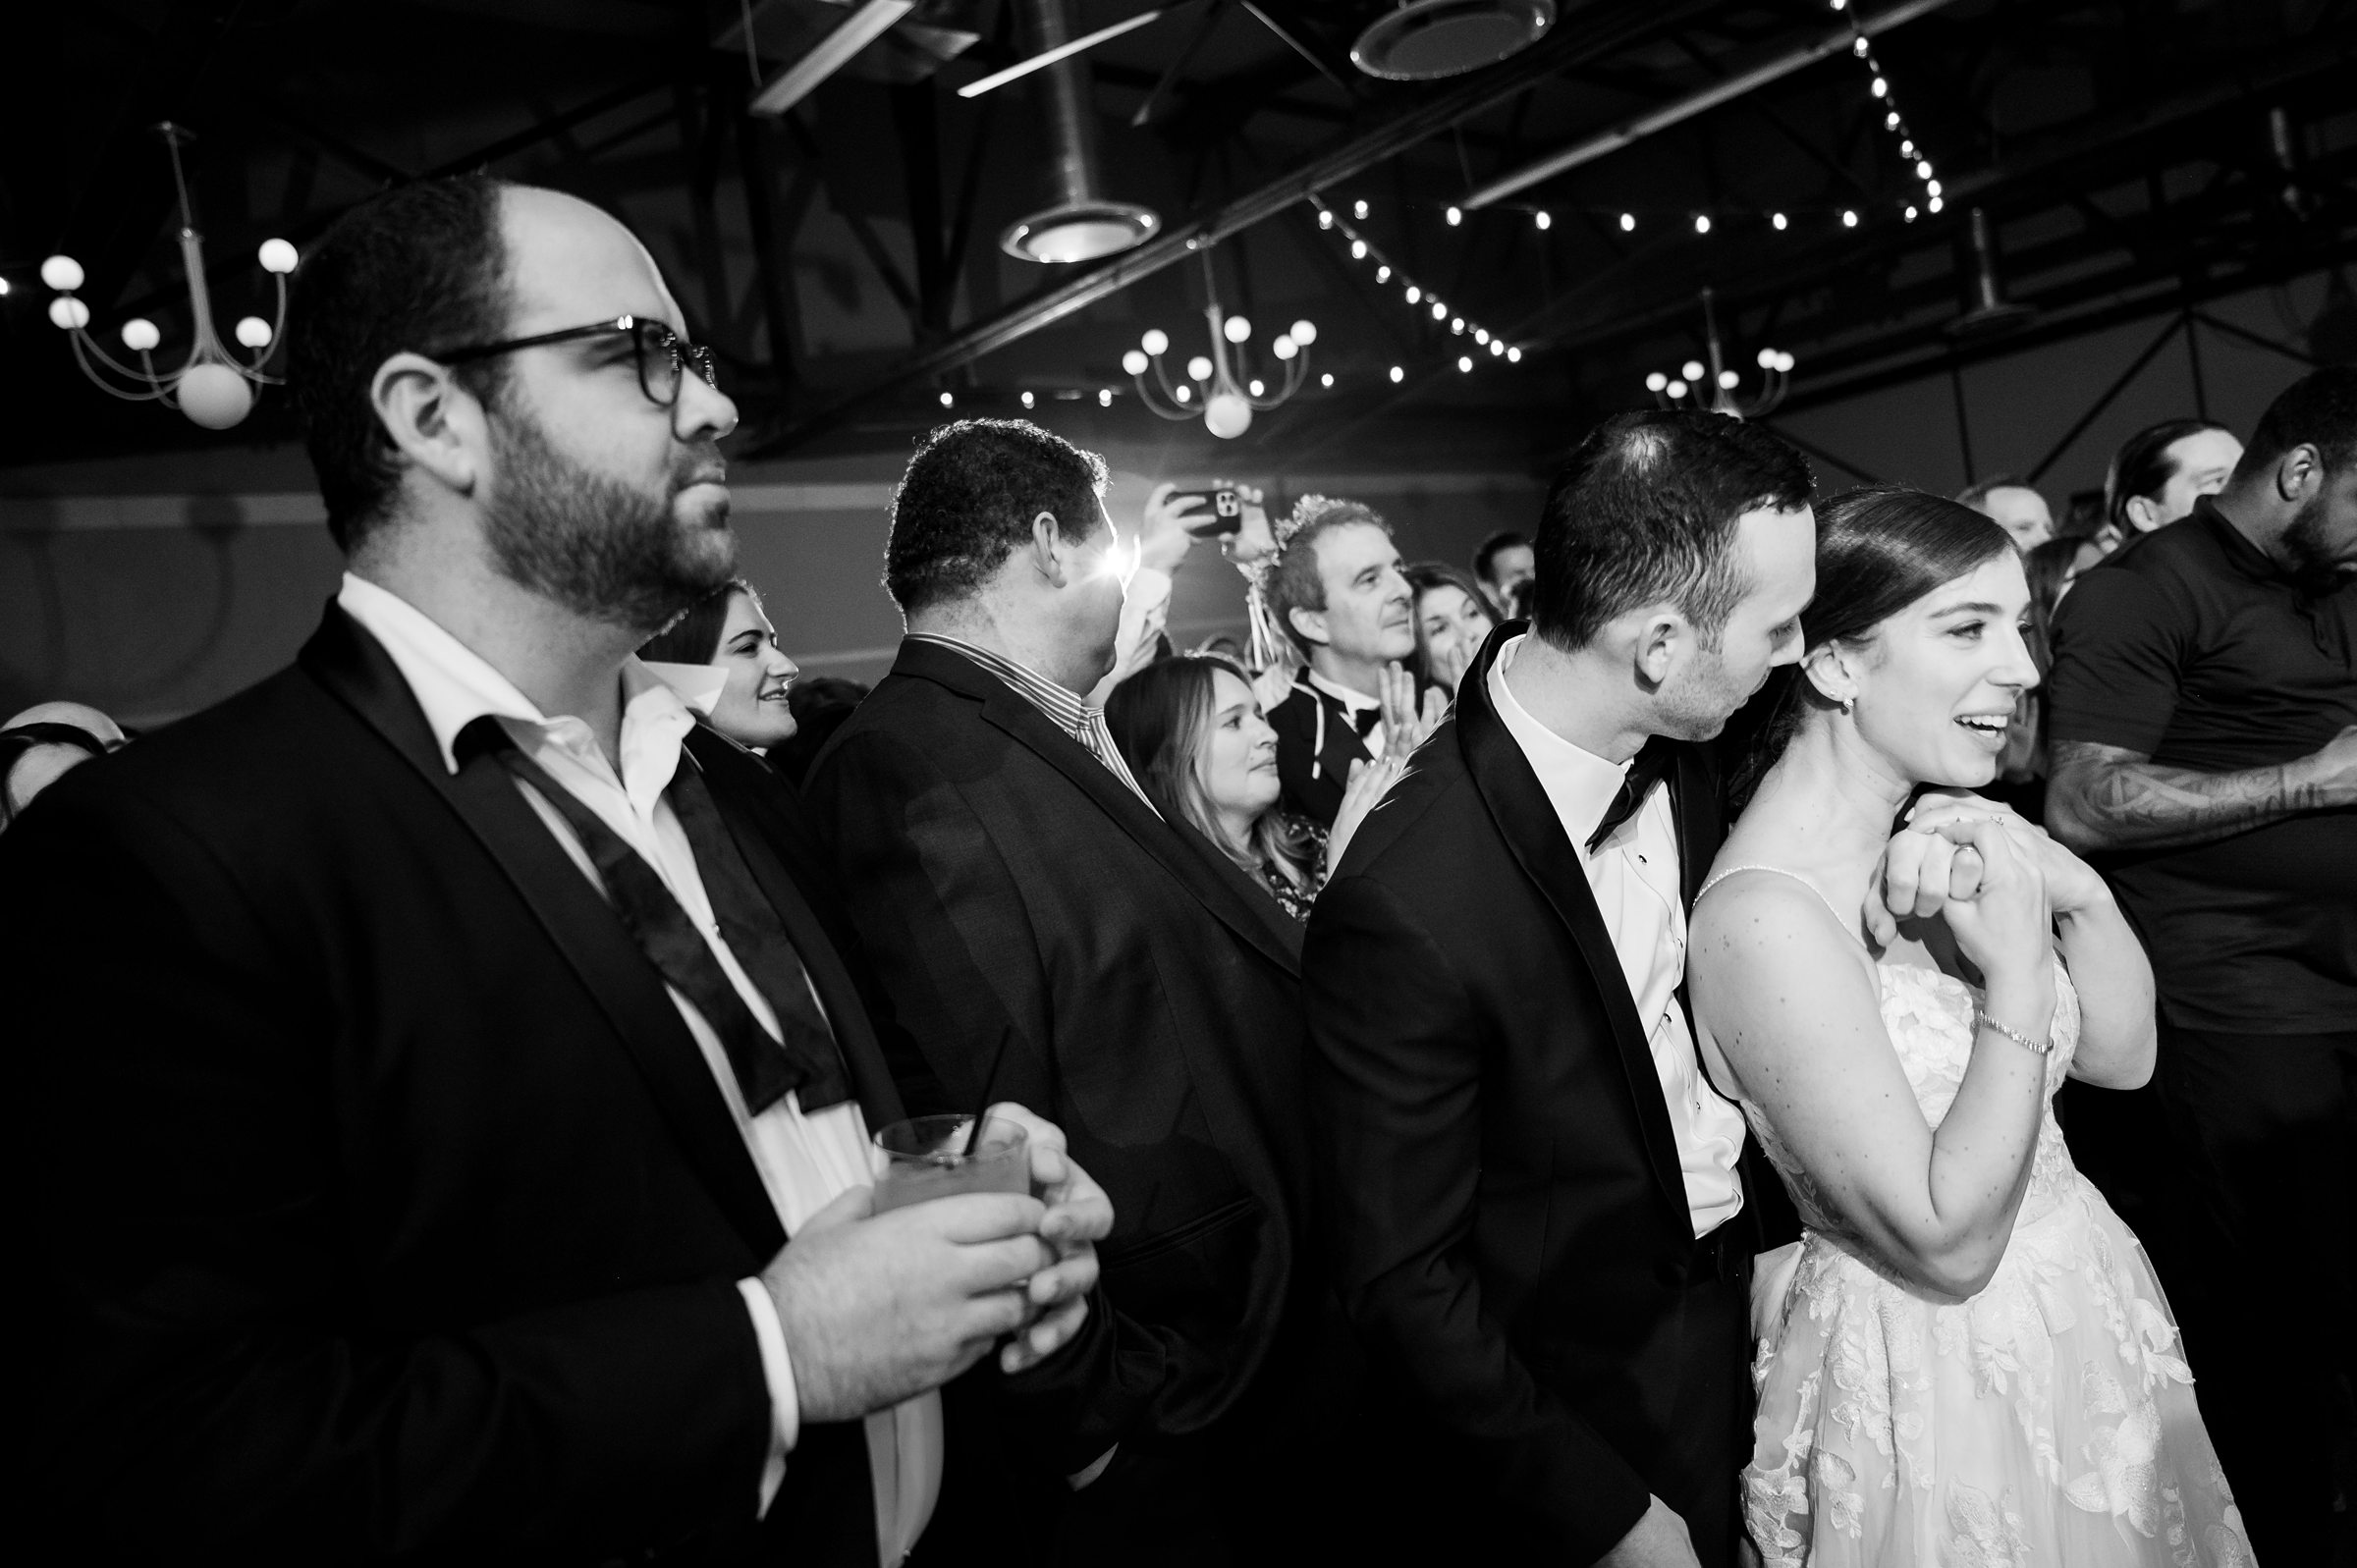 At a Lilah Events wedding, the bride and groom are joyfully dancing at their reception.